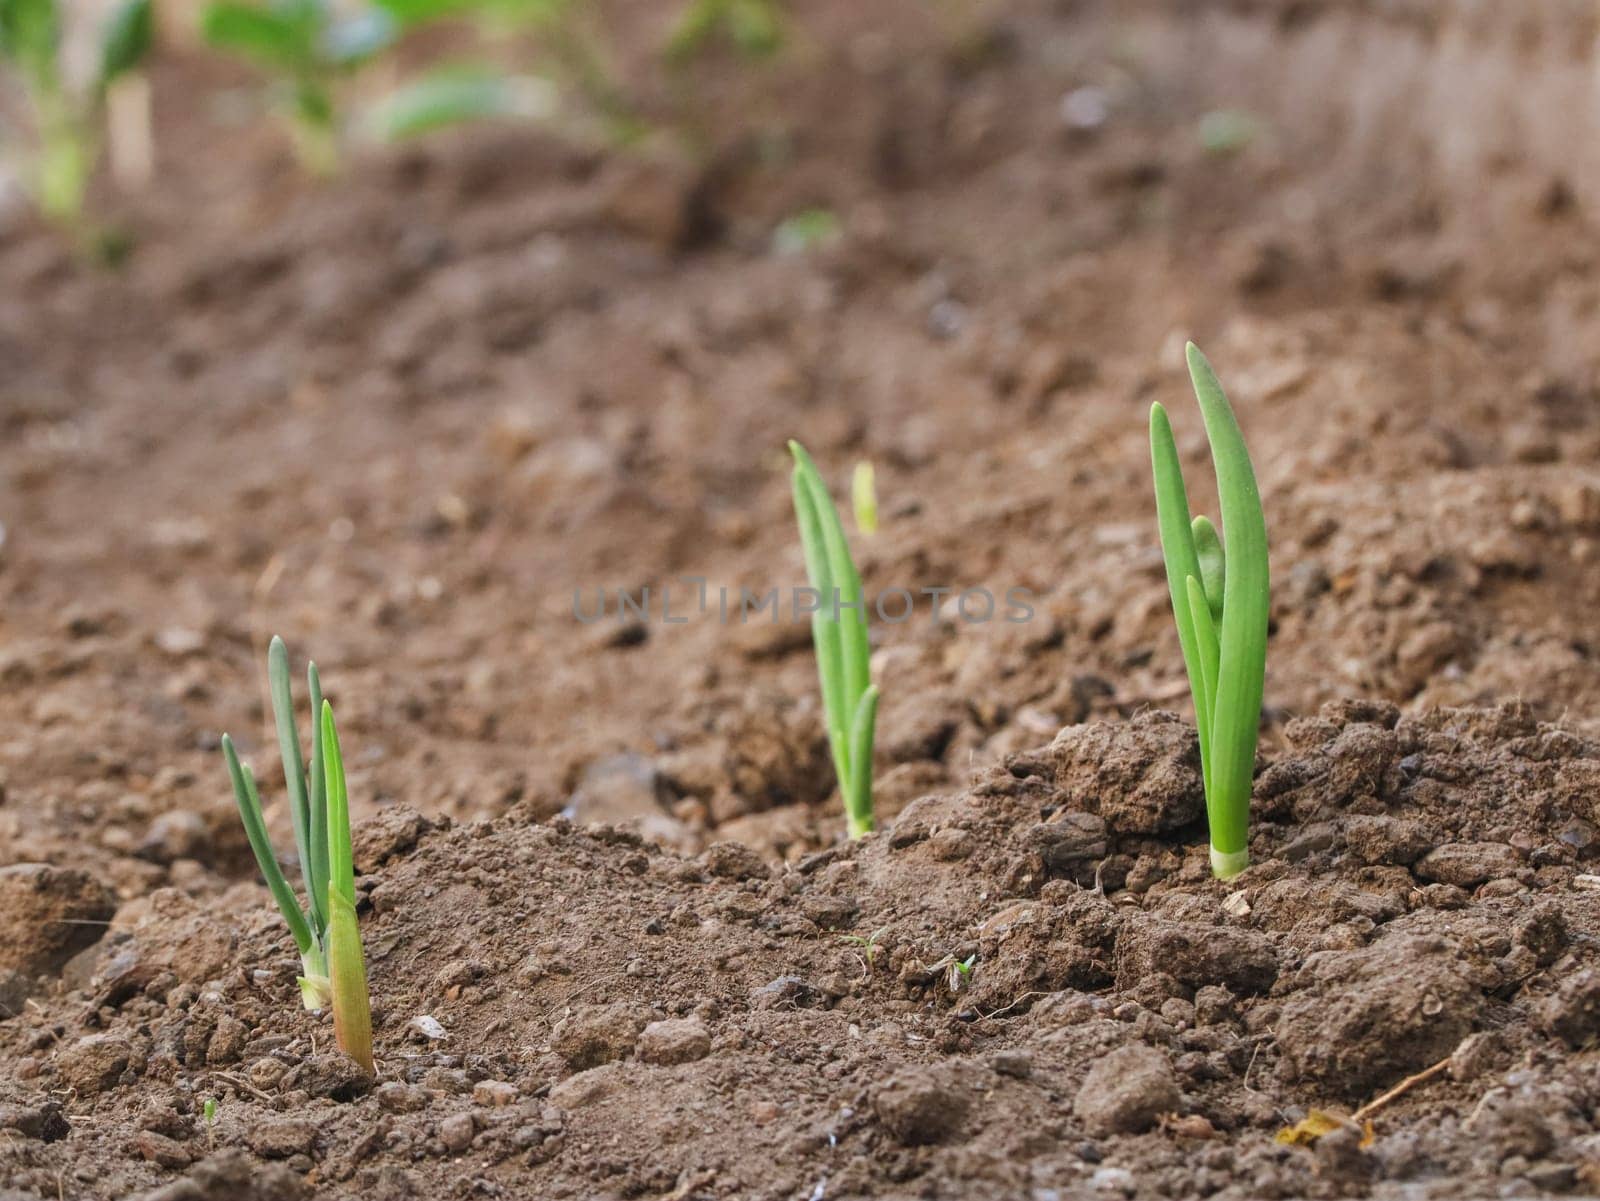 Beautiful view of three young onion sprouts in black soil, close-up side view with depth of field.